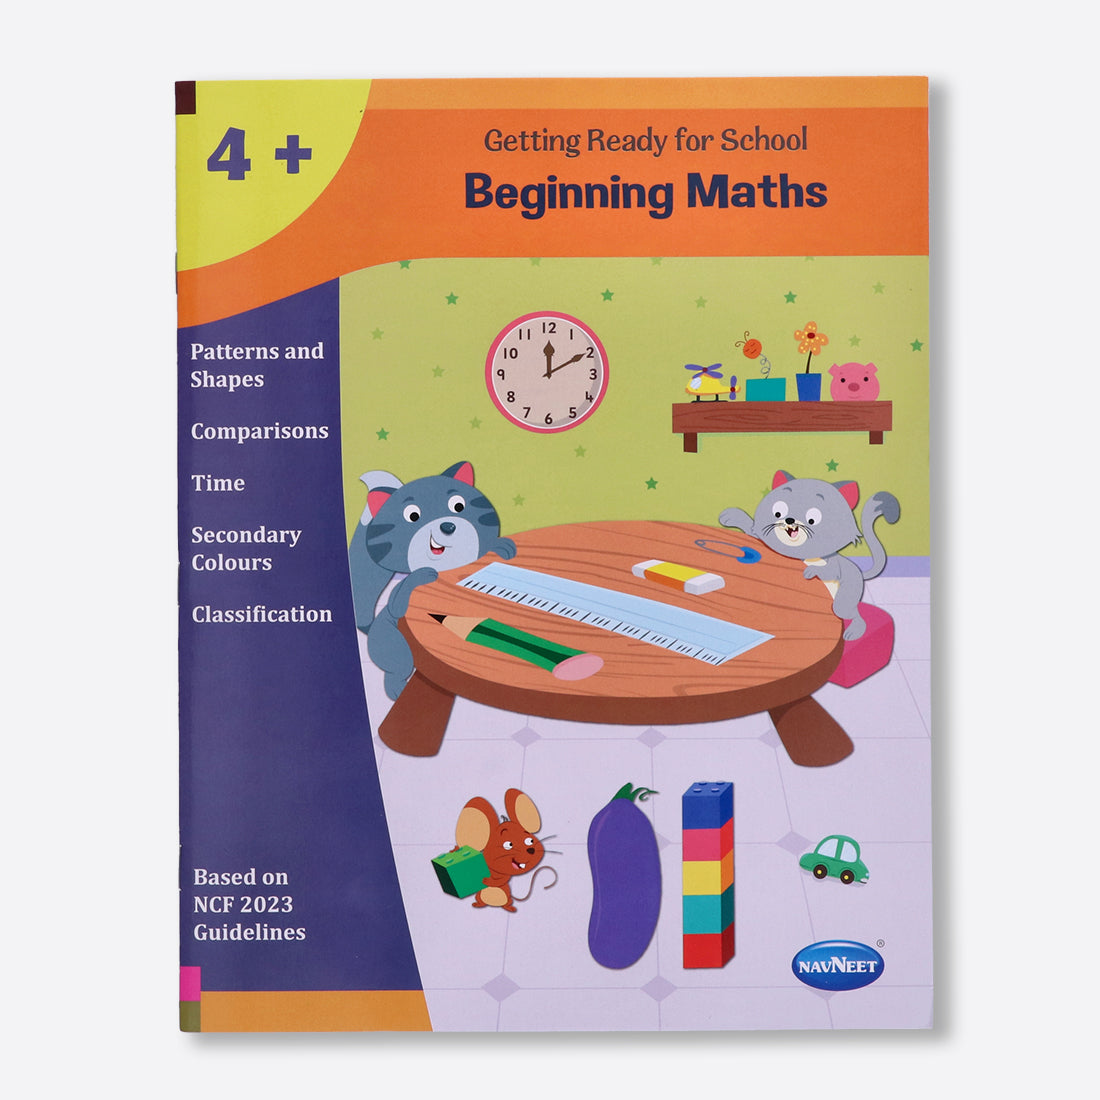 Navneet's Getting Ready for school for age  4+, Patterns and shapes, comparisons, Time, secondary colours, classification